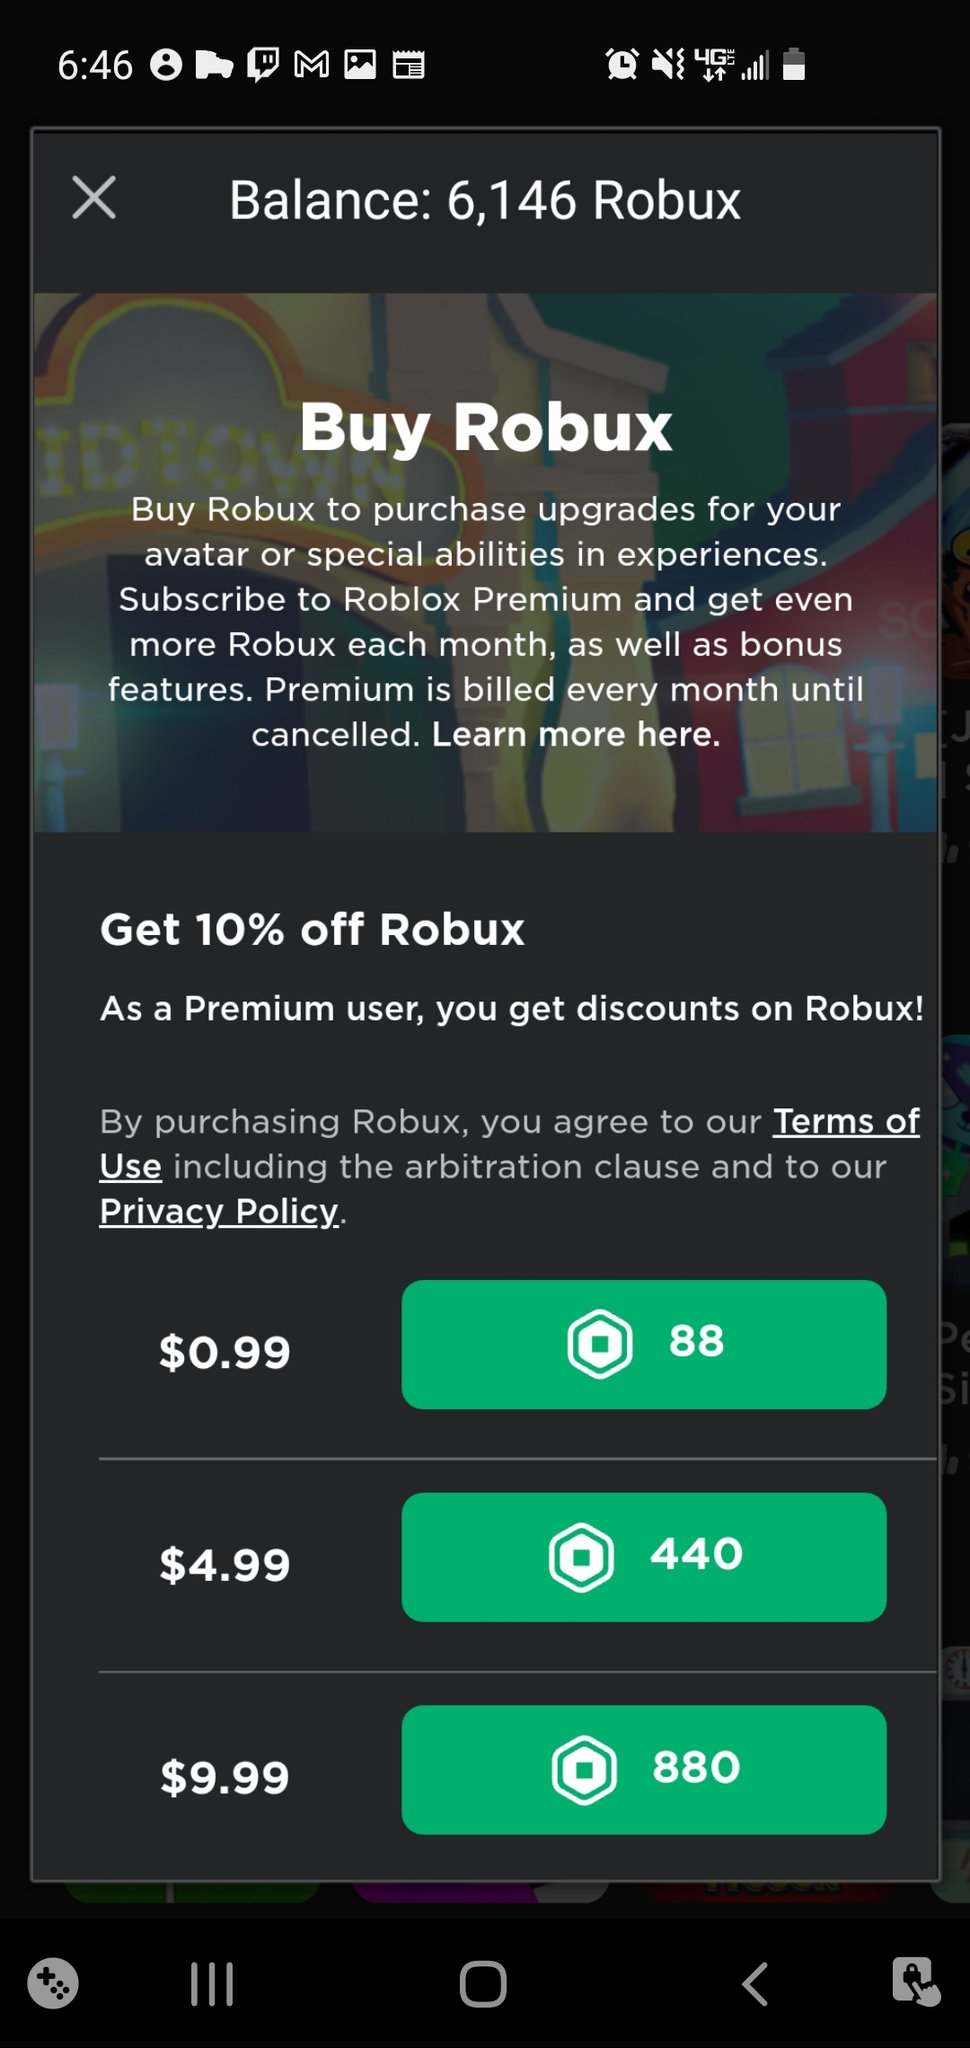 Is there tax for buying Robux?